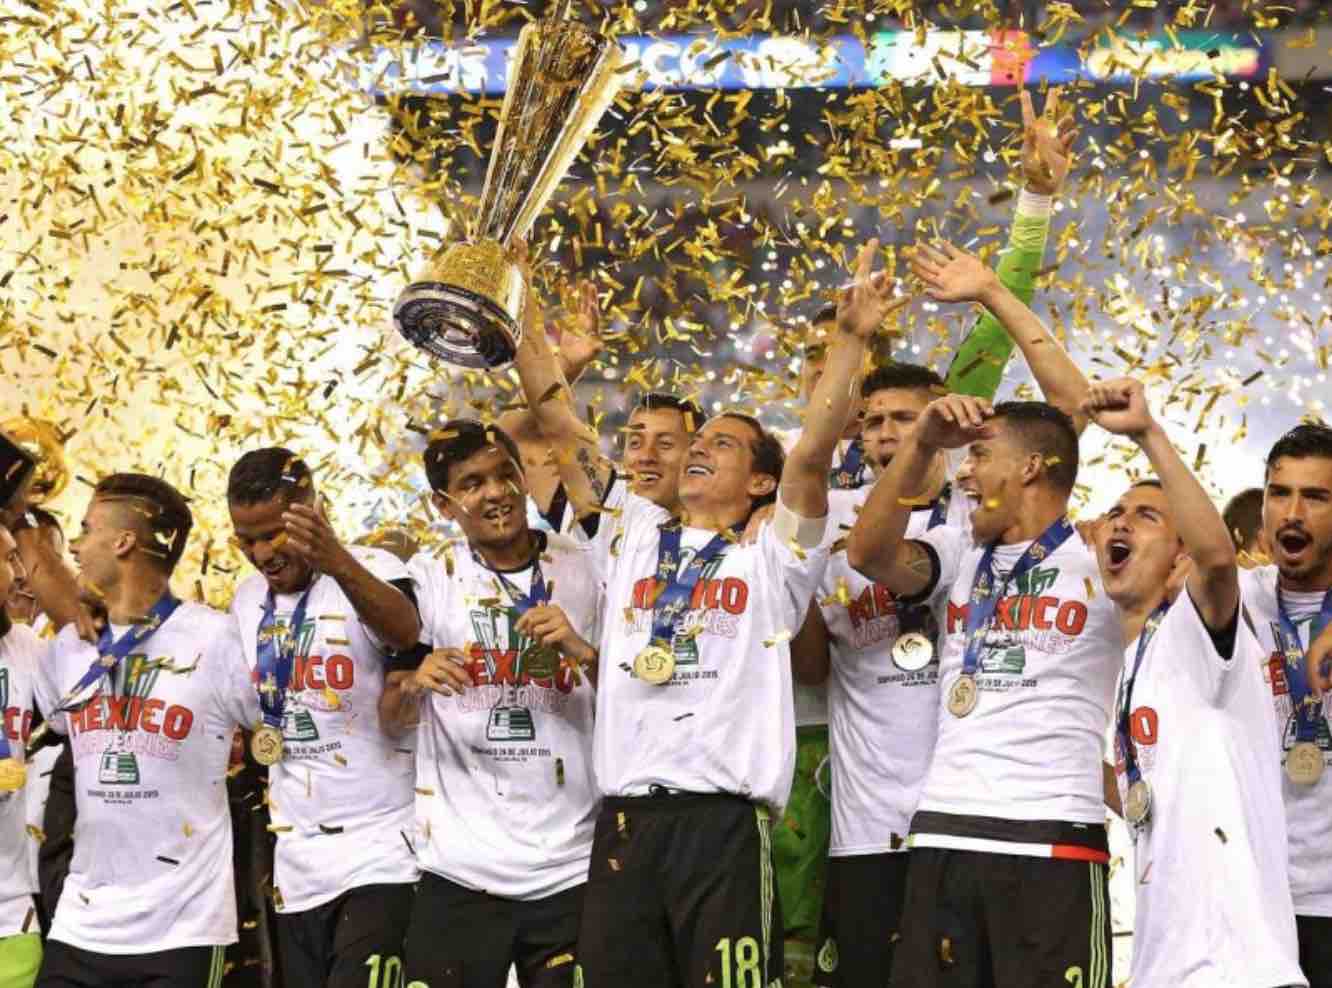 Mexico ends up clinching Gold Cup tittle